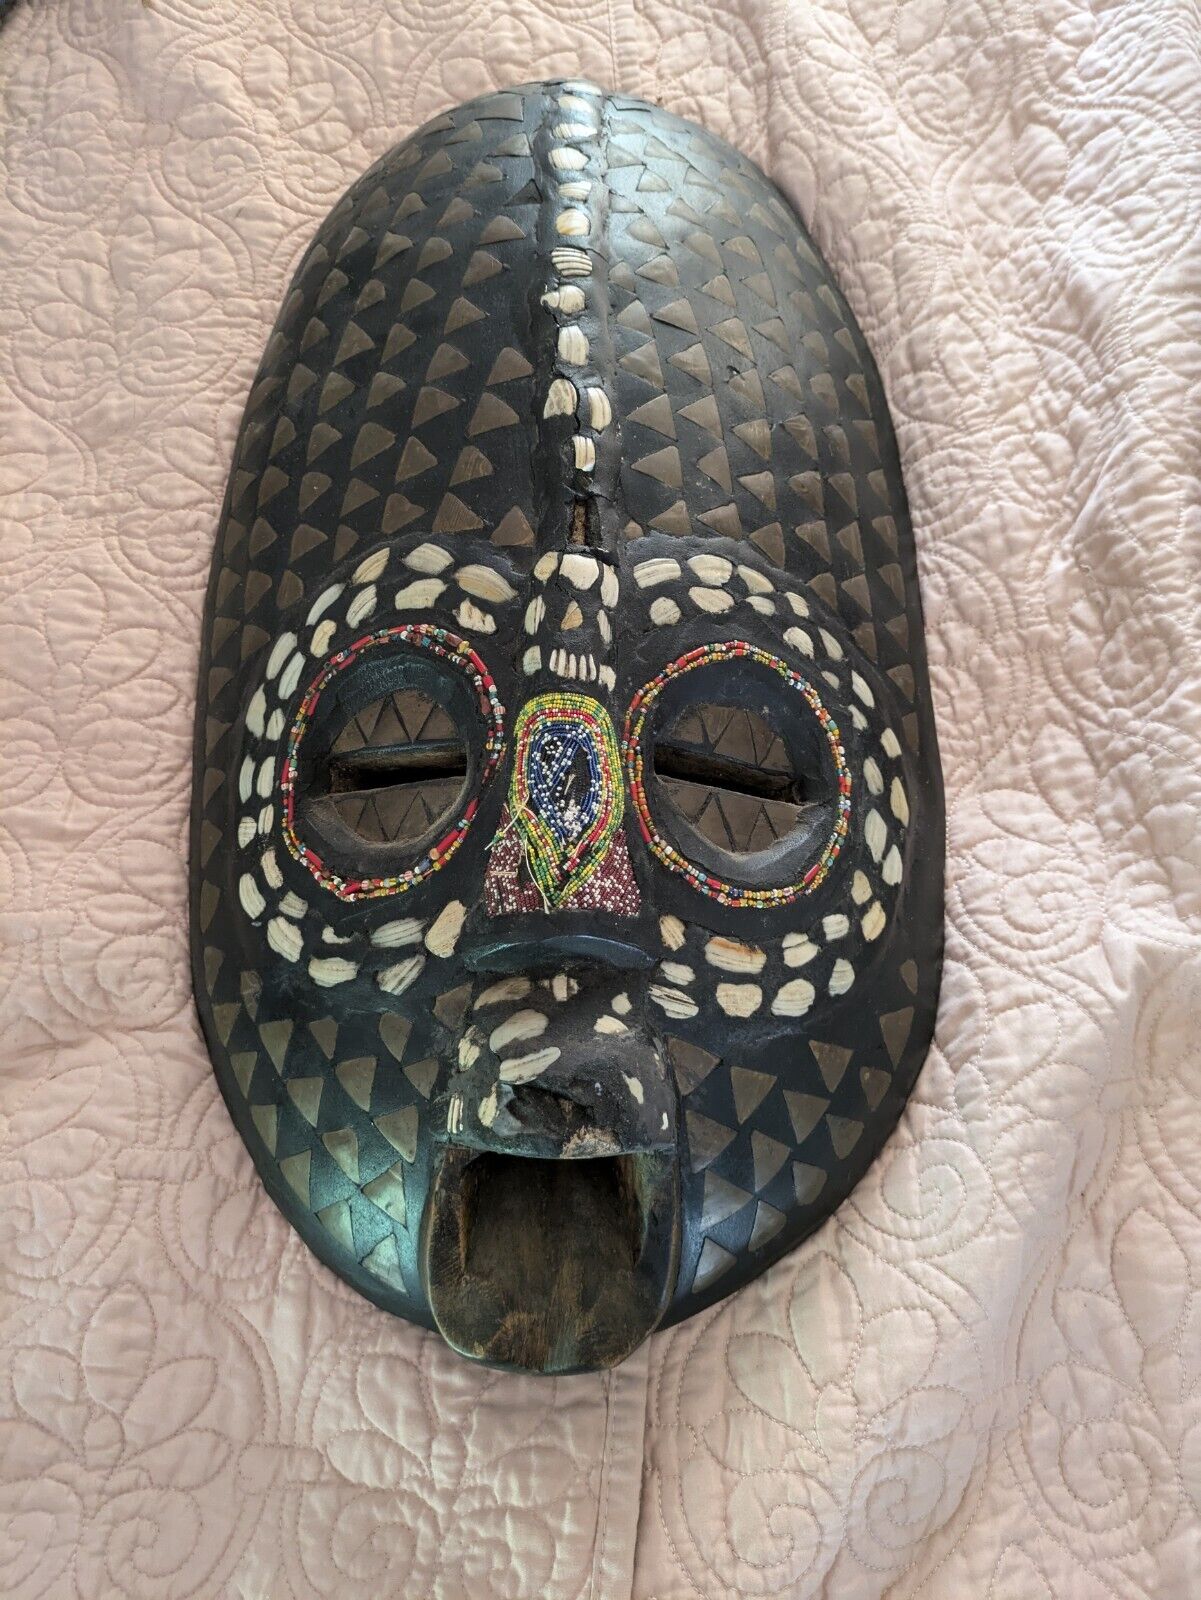 Vintage African Mask Made of Wood, Shells and Beads - Ghanaian 